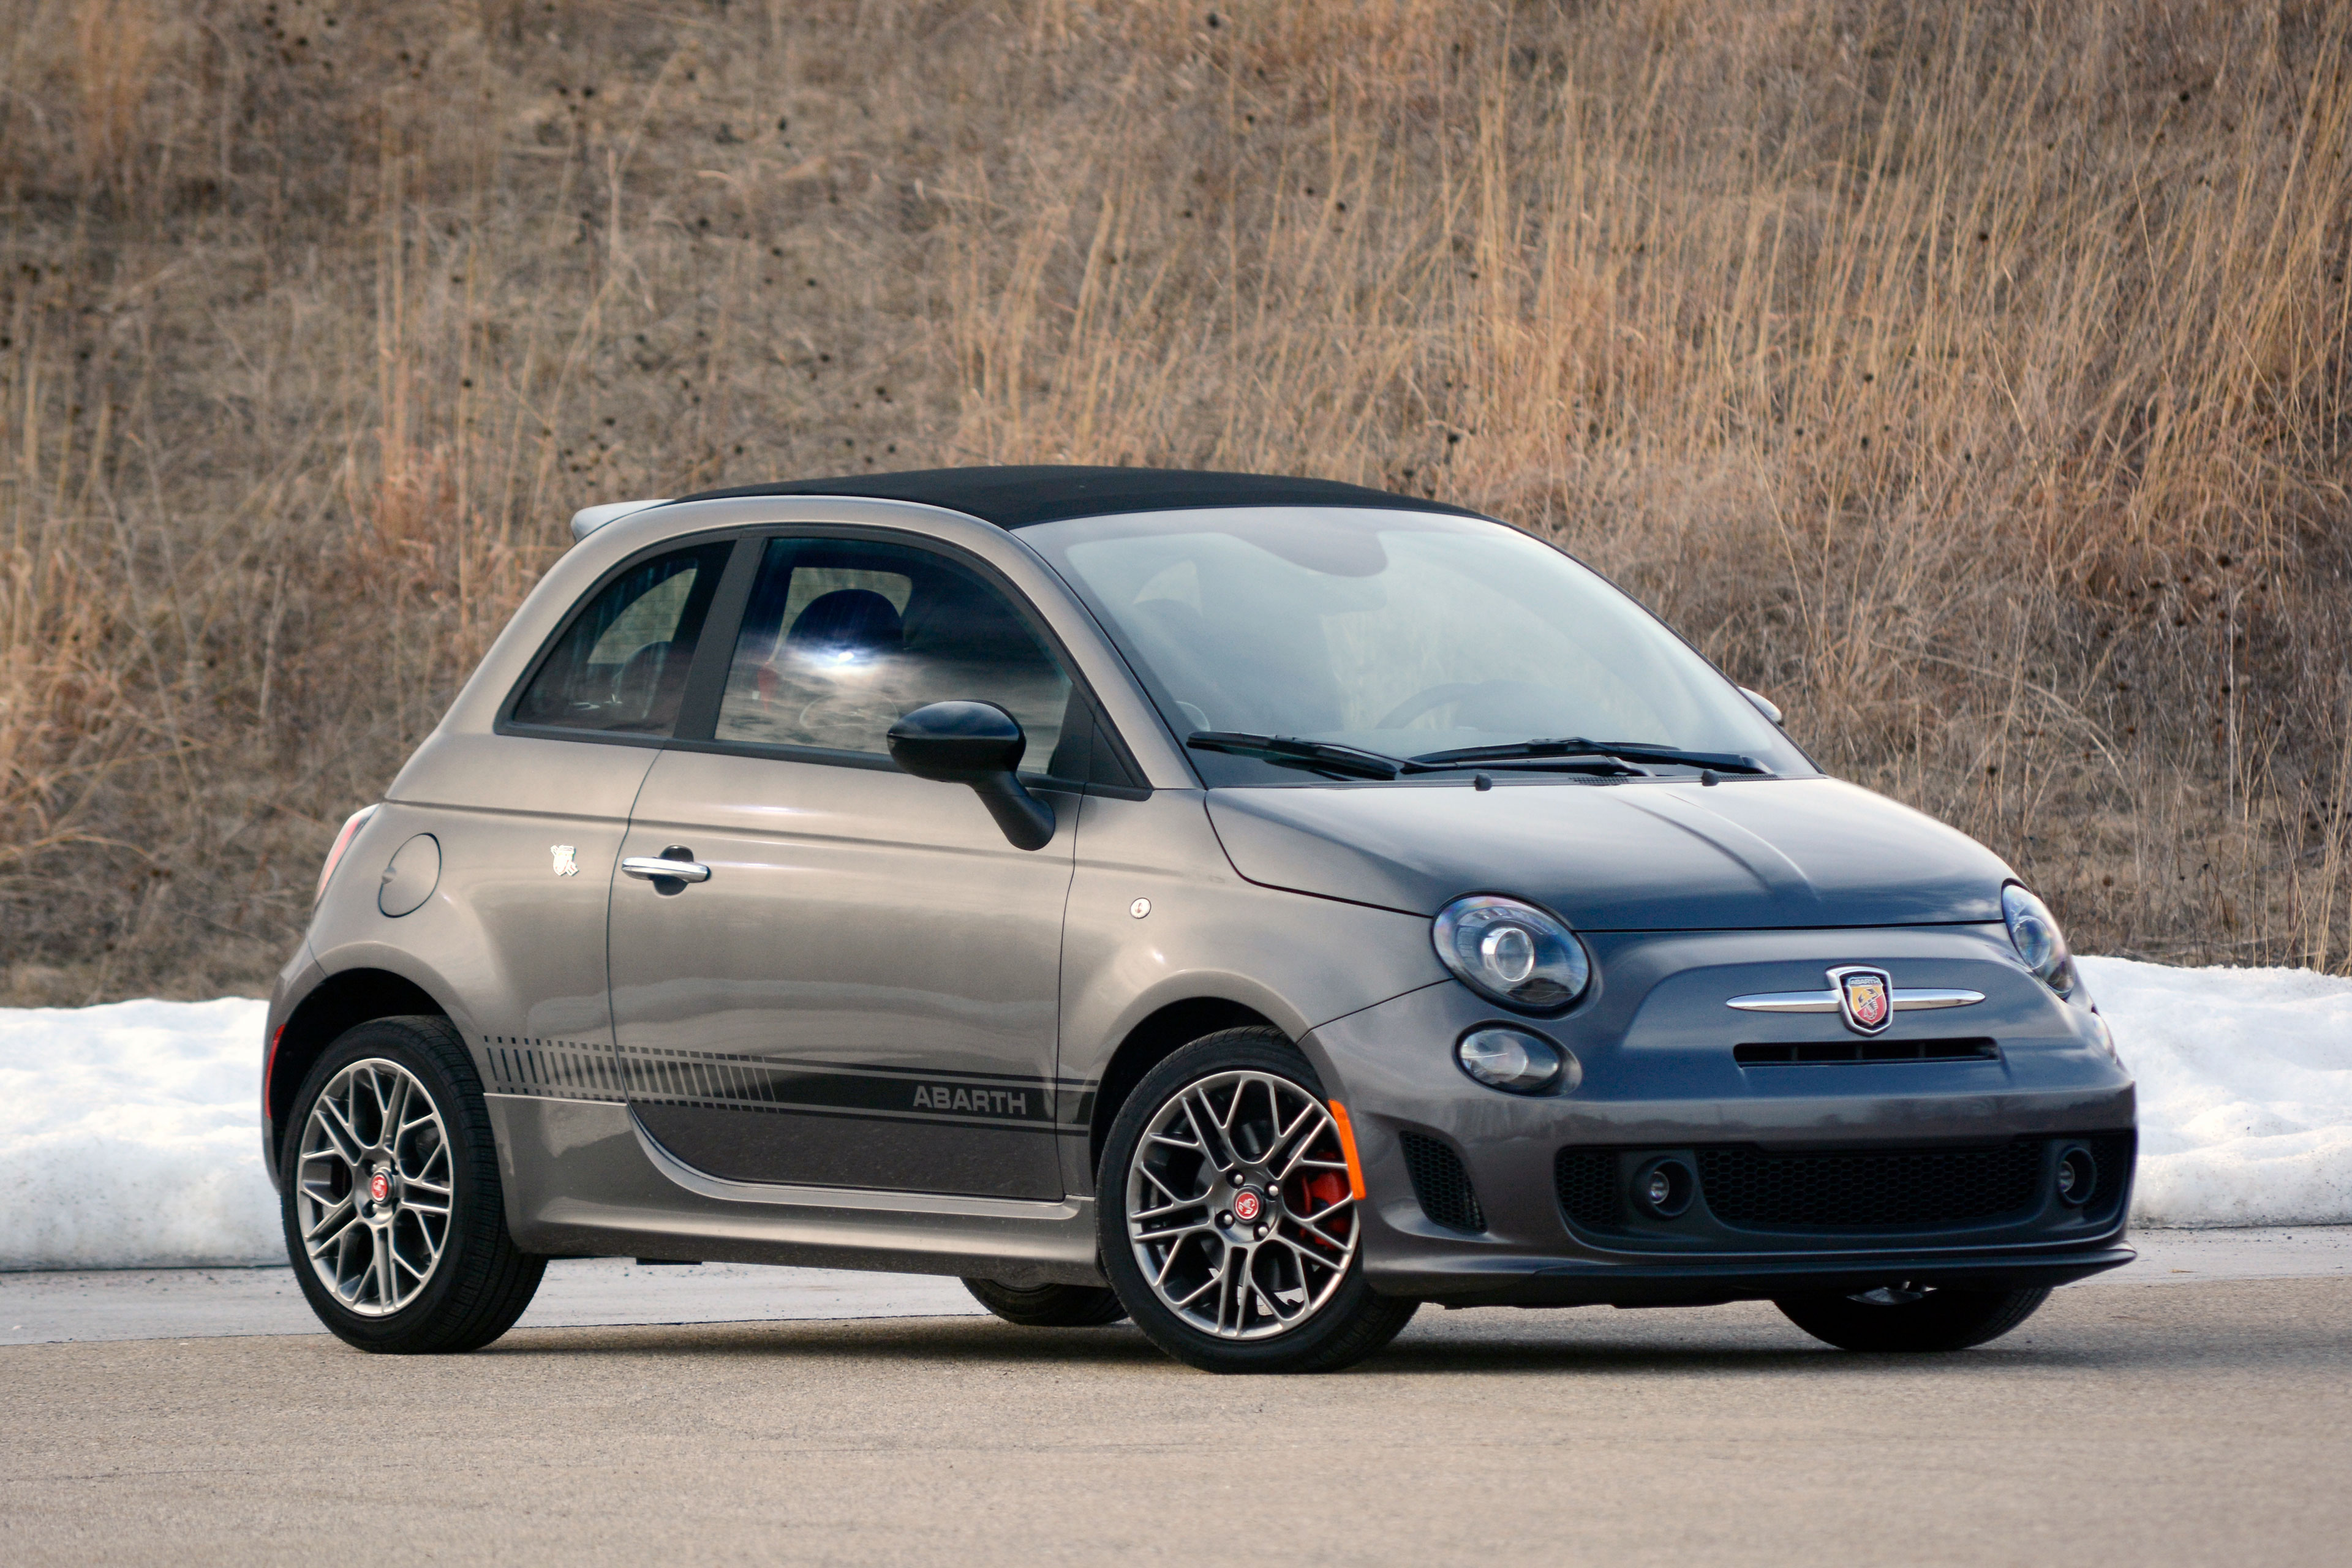 Gallery For gt; Fiat 500 Abarth